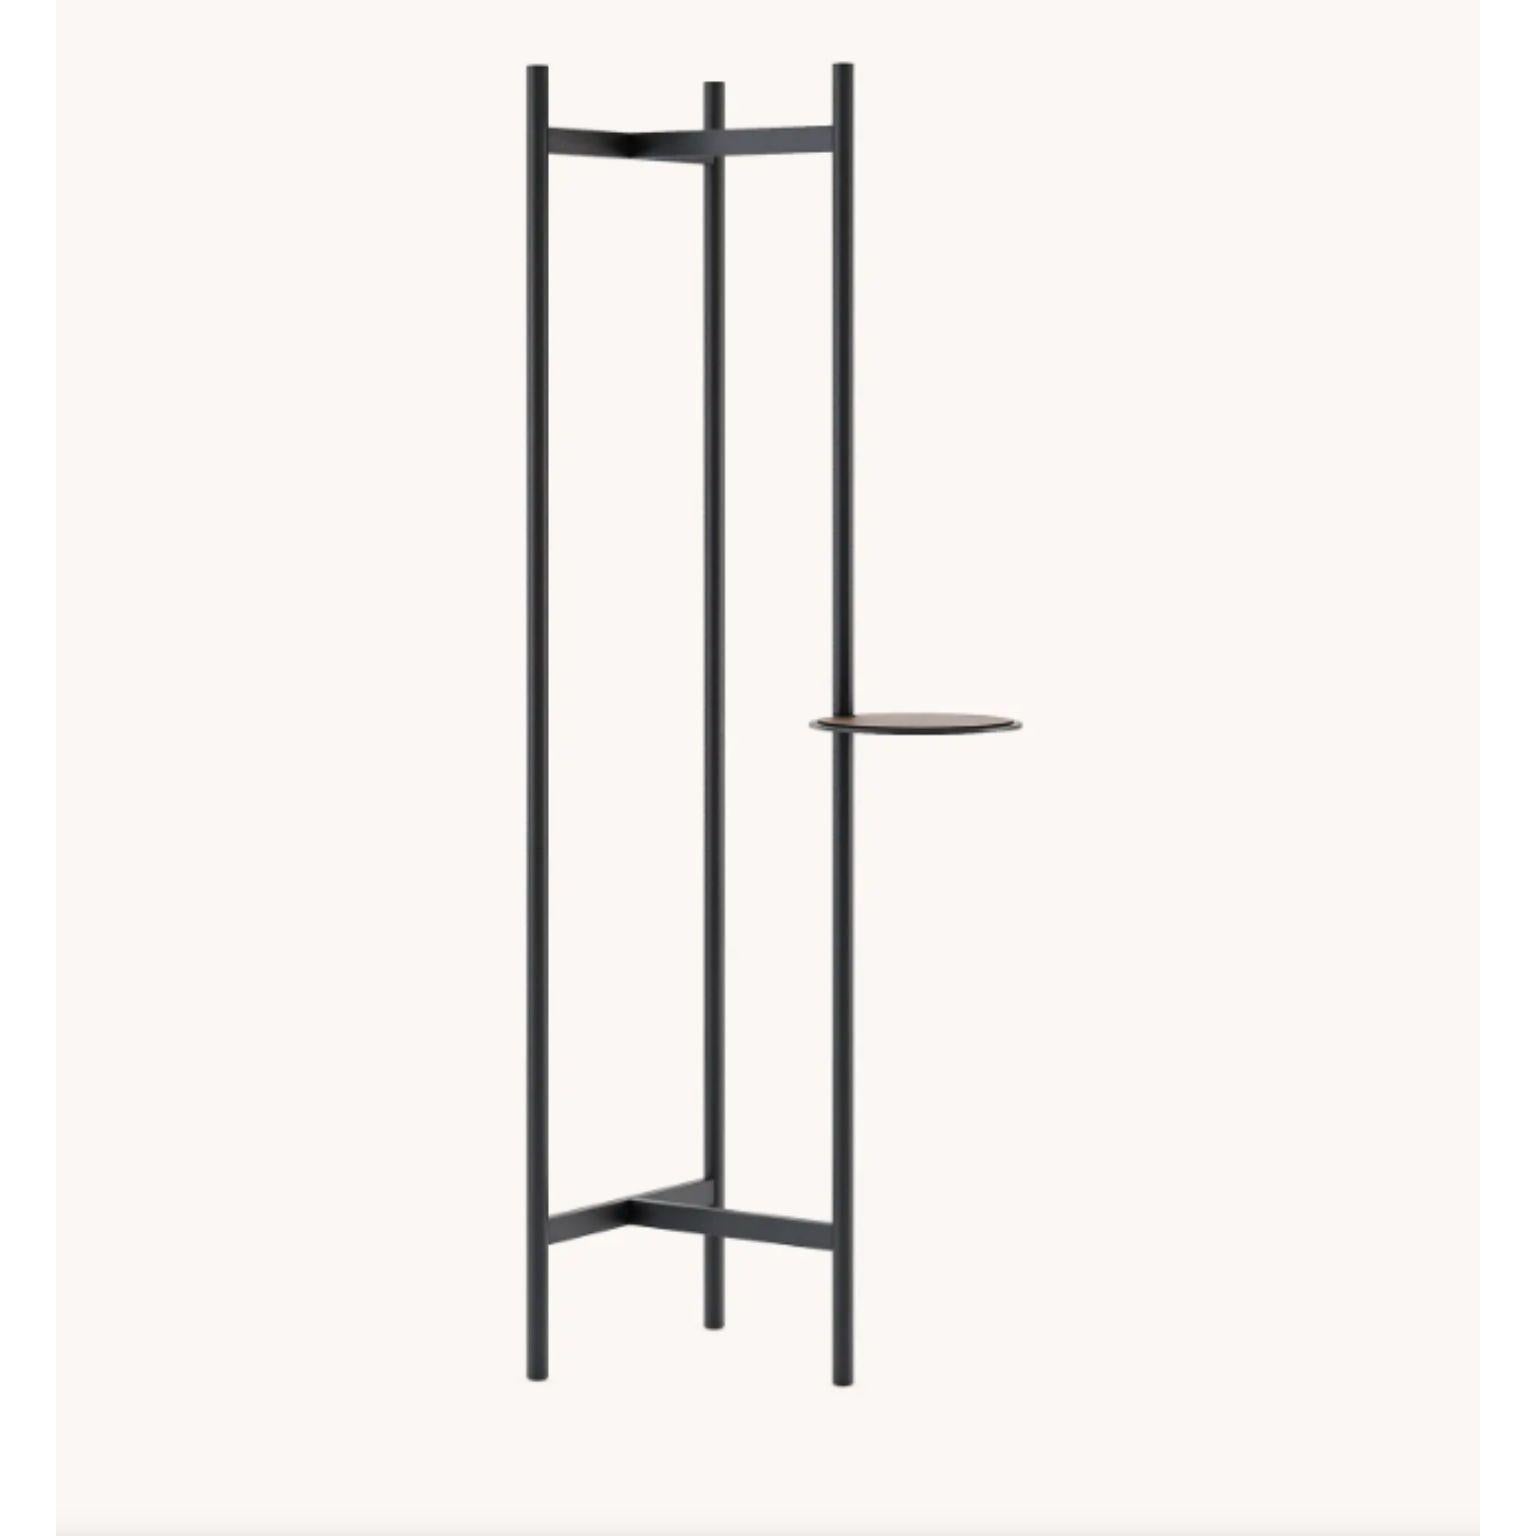 Ralph hanger by Domkapa
Dimensions: W 37.5 x D 34 x H 150 cm.
Materials: Black texturized steel, natural leather (Albany Terra).
Also available in different materials.

Distinguished by its three tall vertical tubes, Ralph is a minimalistic